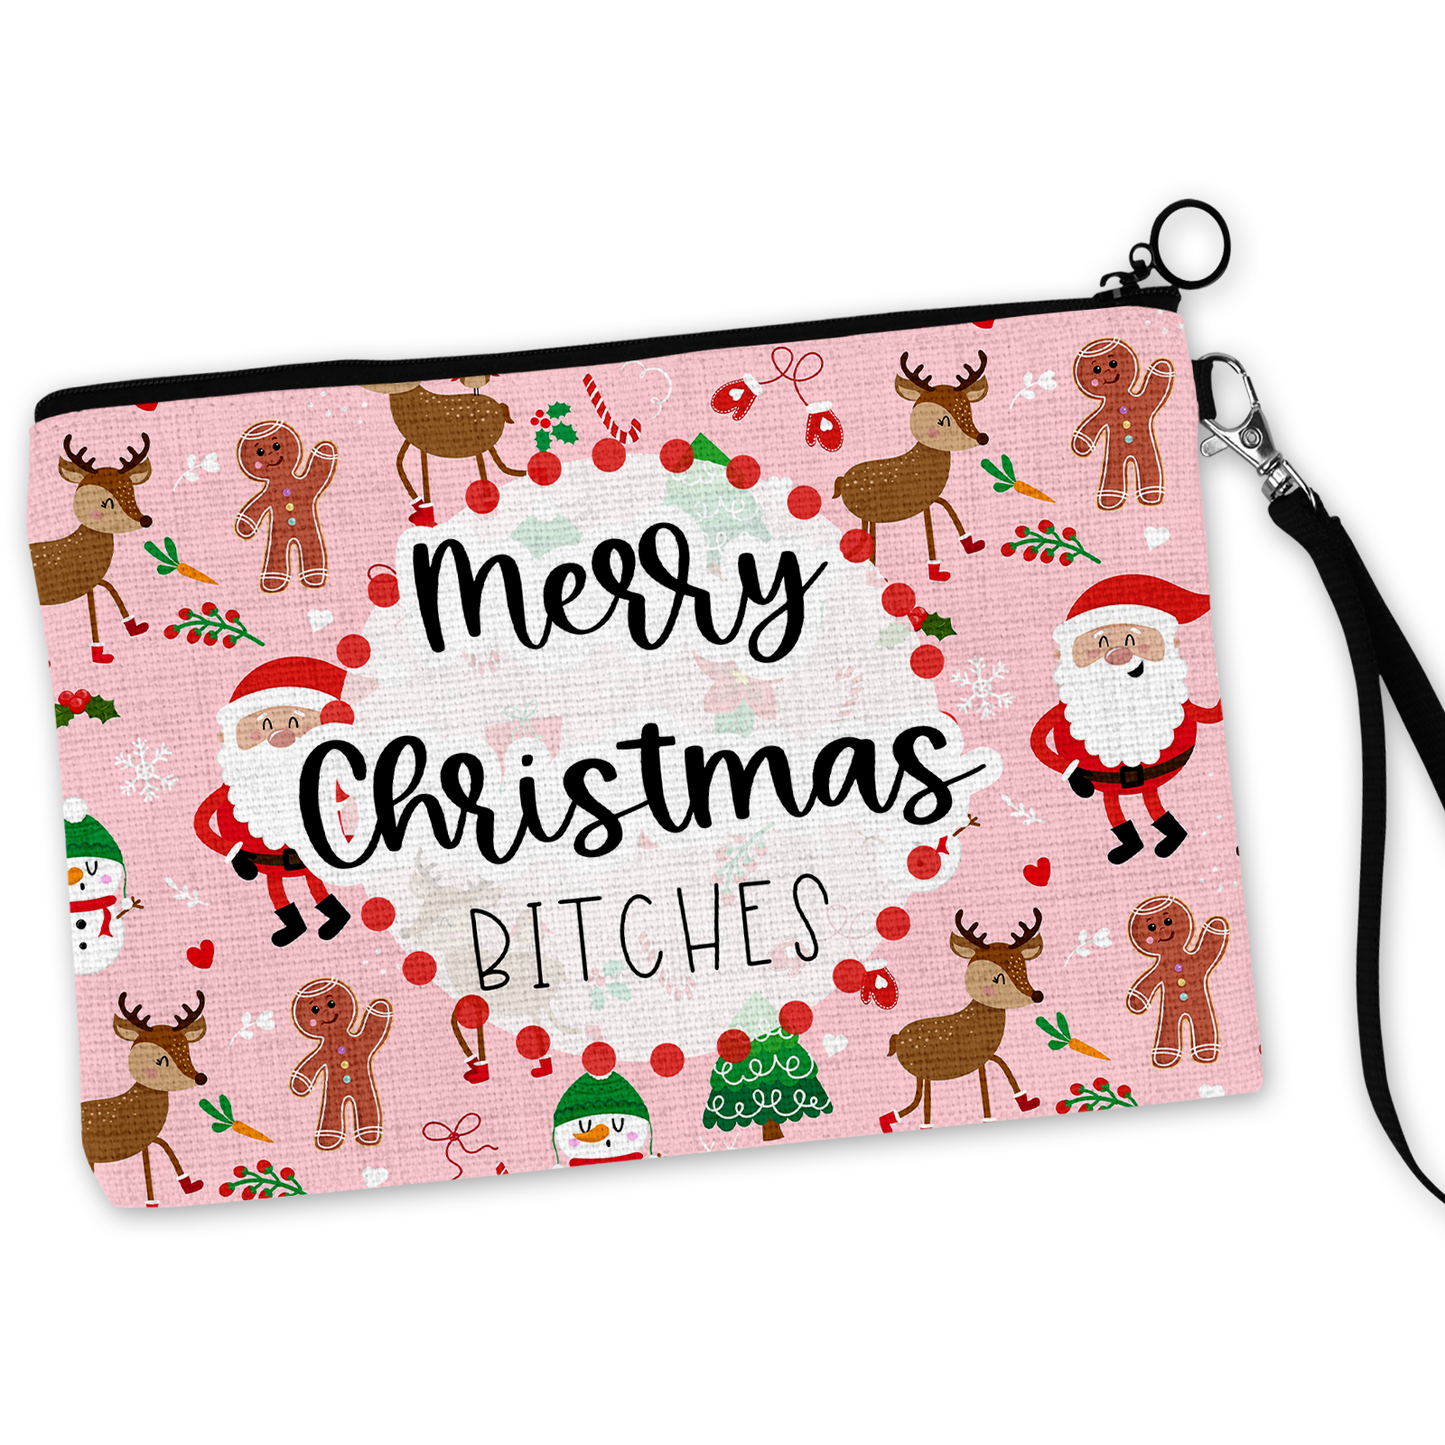 Merry Christmas Bitches Cosmetic Bag